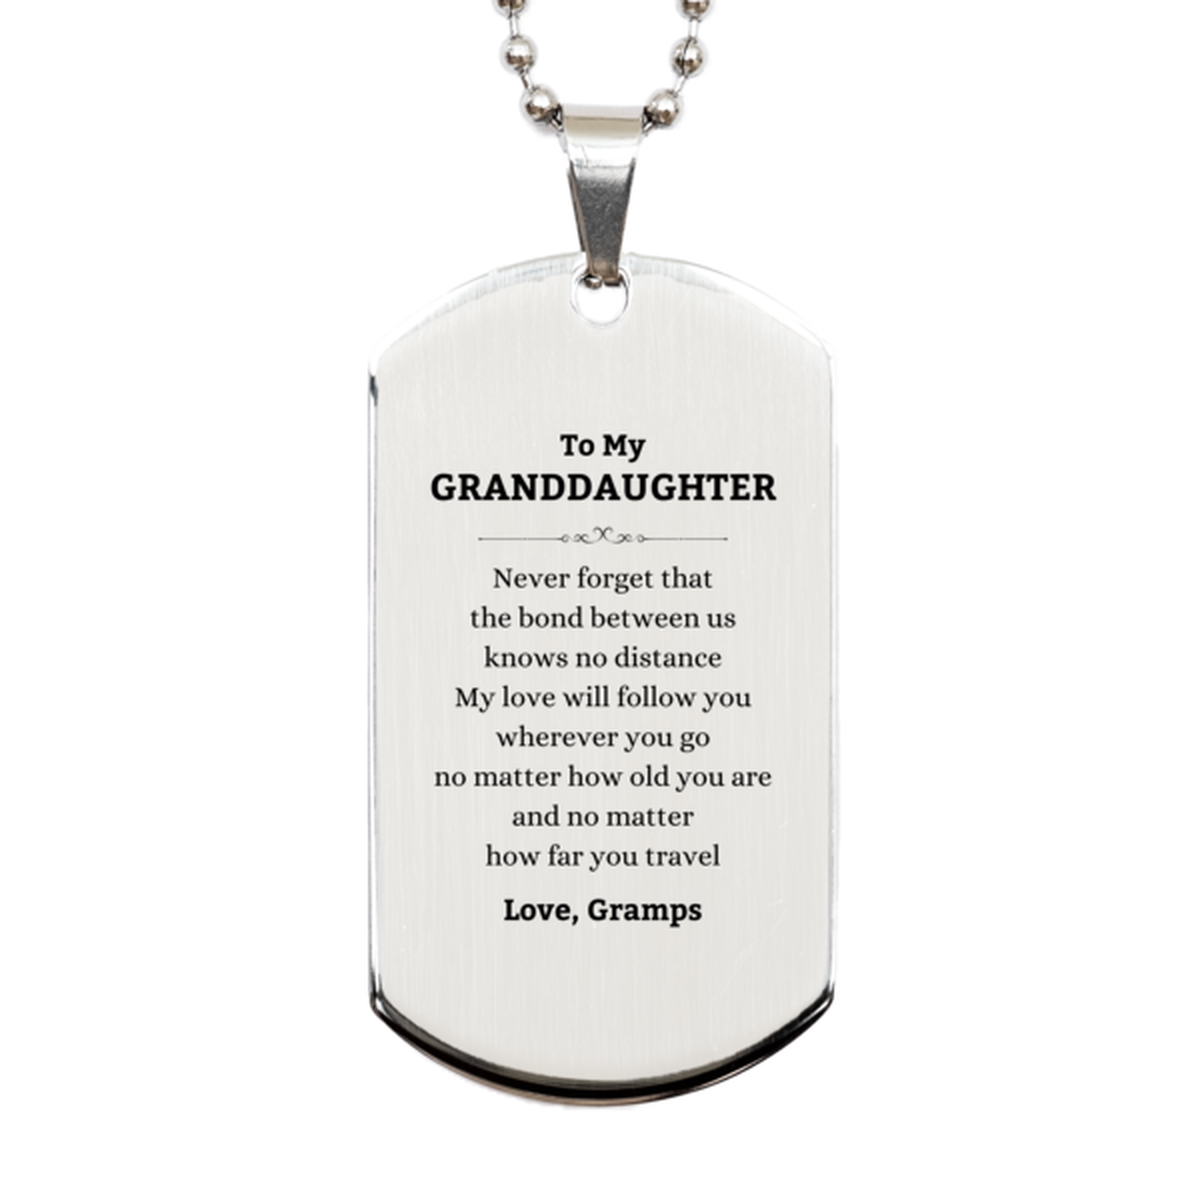 Granddaughter Birthday Gifts from Gramps, Adjustable Silver Dog Tag for Granddaughter Christmas Graduation Unique Gifts Granddaughter Never forget that the bond between us knows no distance. Love, Gramps